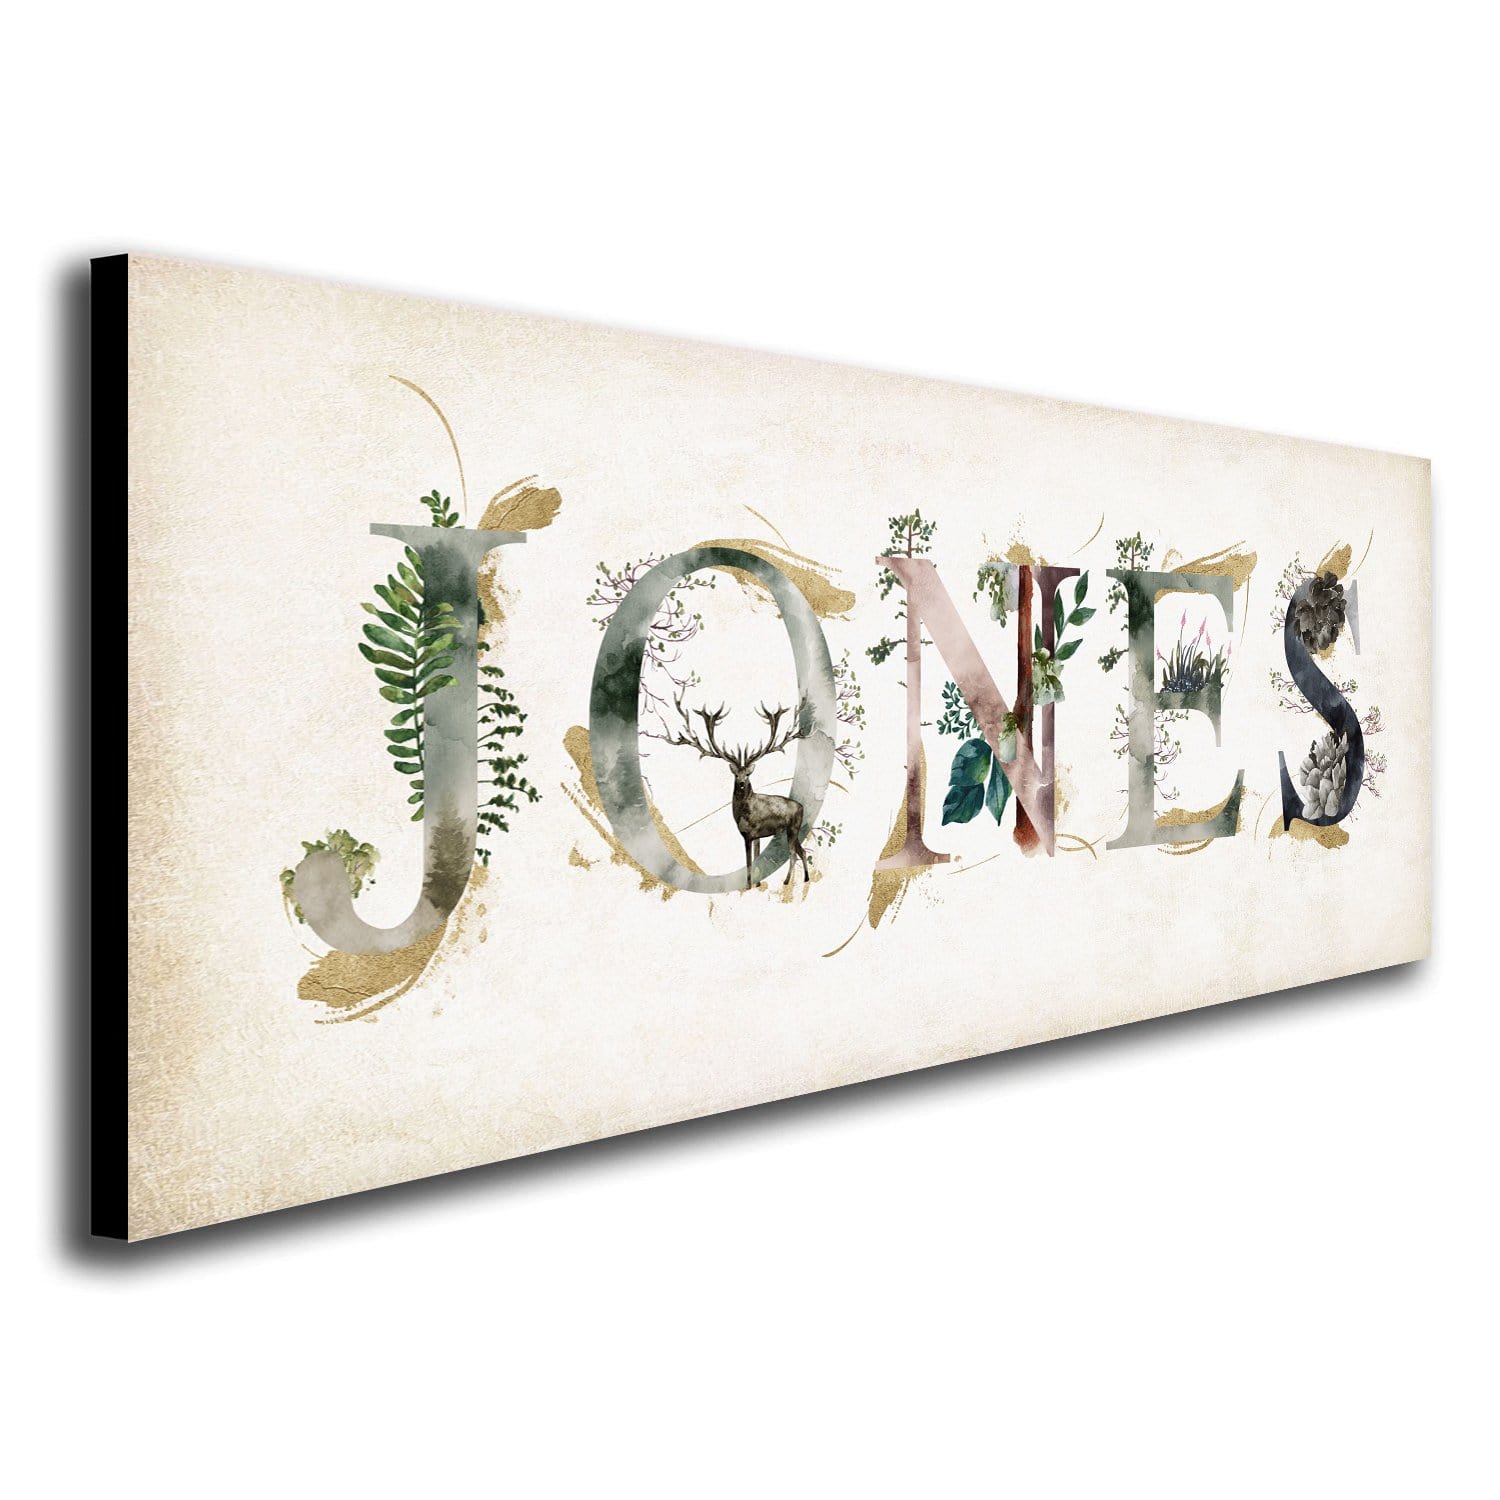 Wilderness name art sign from Personal Prints